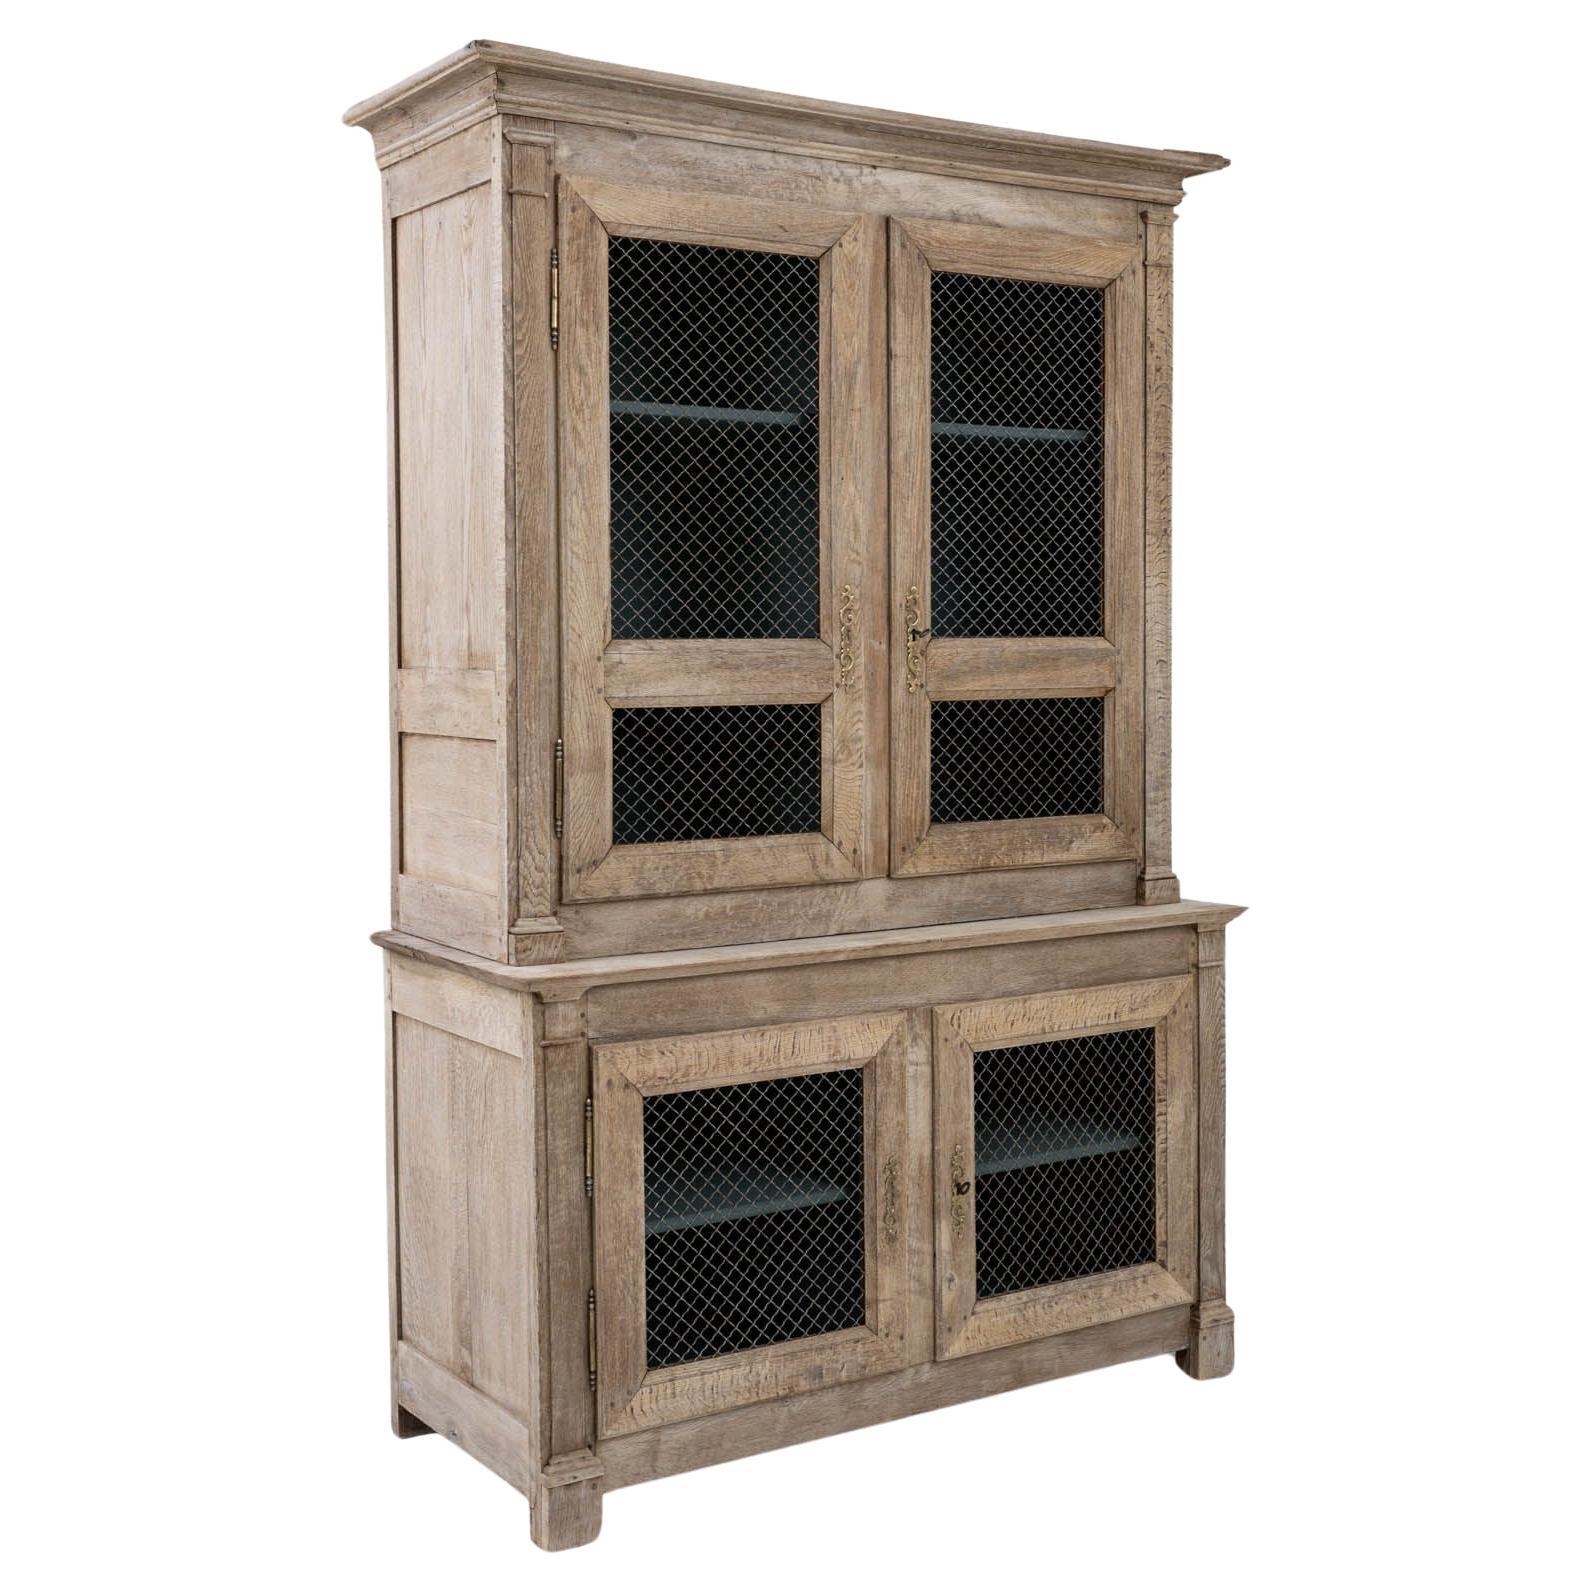 19th Century French Bleached Oak Linen Cabinet